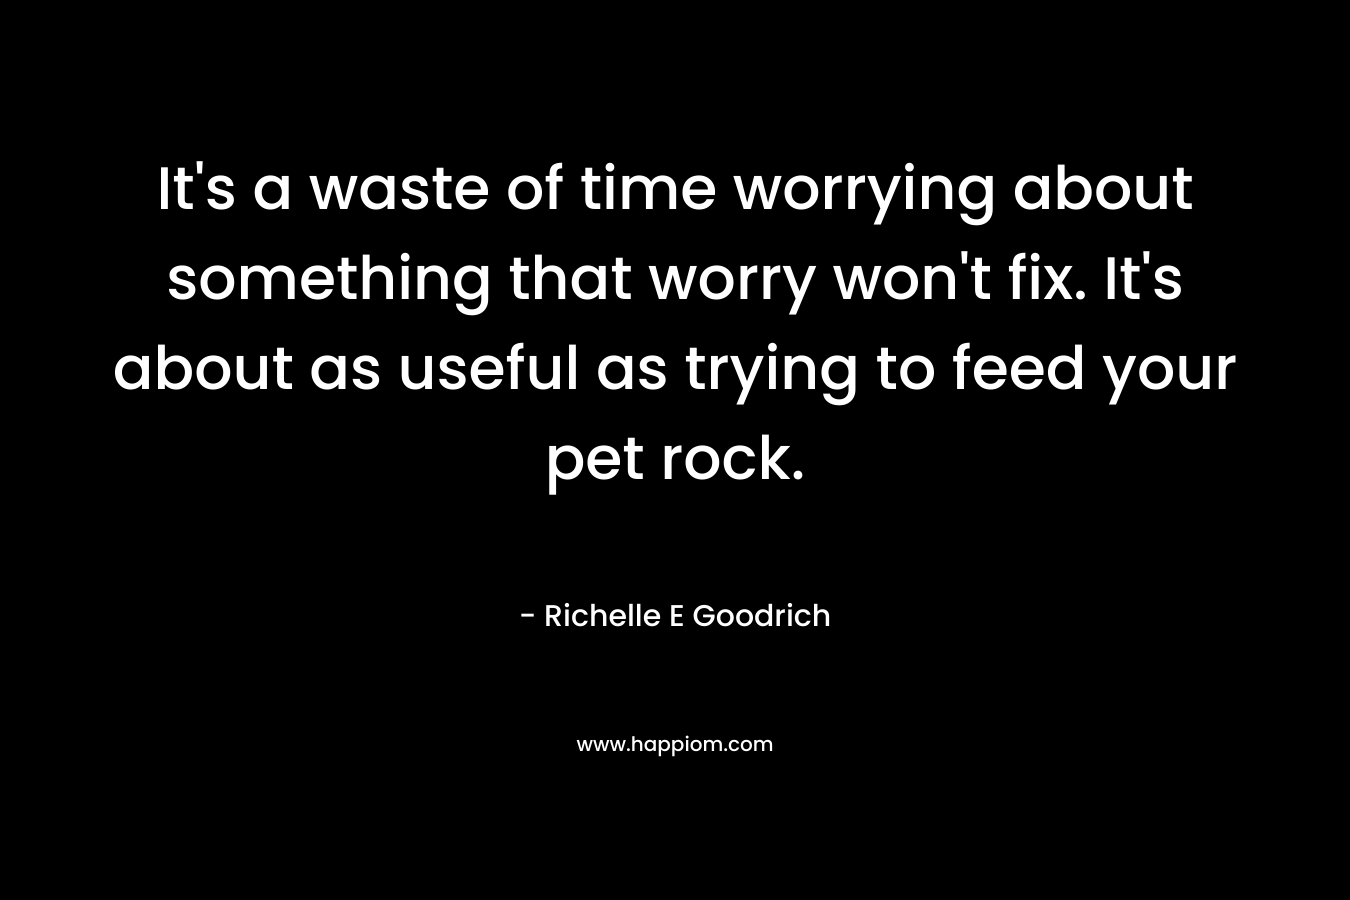 It’s a waste of time worrying about something that worry won’t fix. It’s about as useful as trying to feed your pet rock. – Richelle E Goodrich